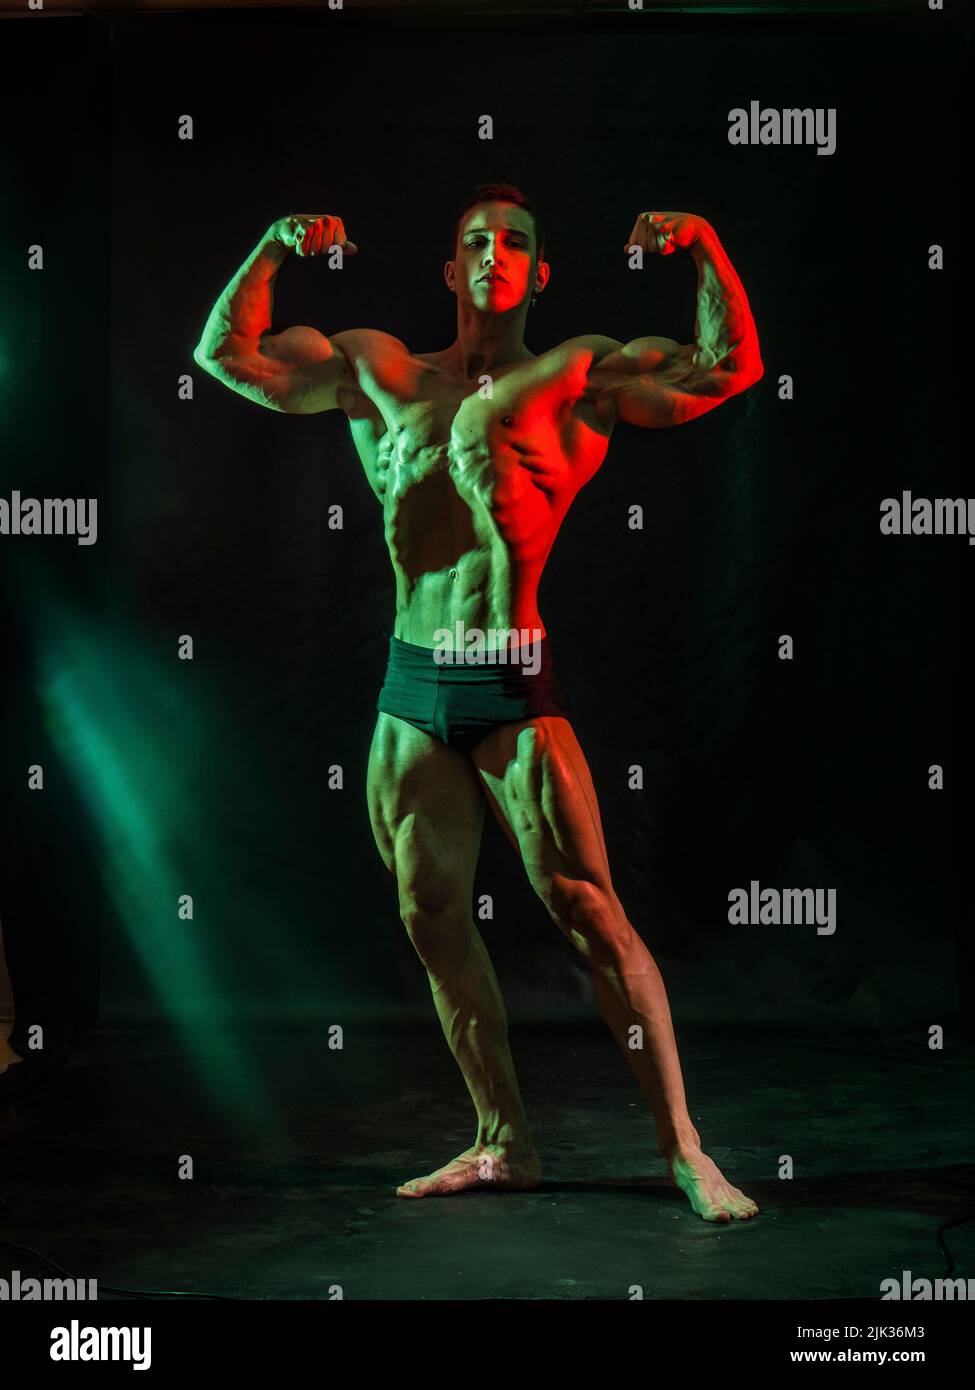 Handsome bodybuilder doing classic double biceps pose, looking away, on dark background Stock Photo